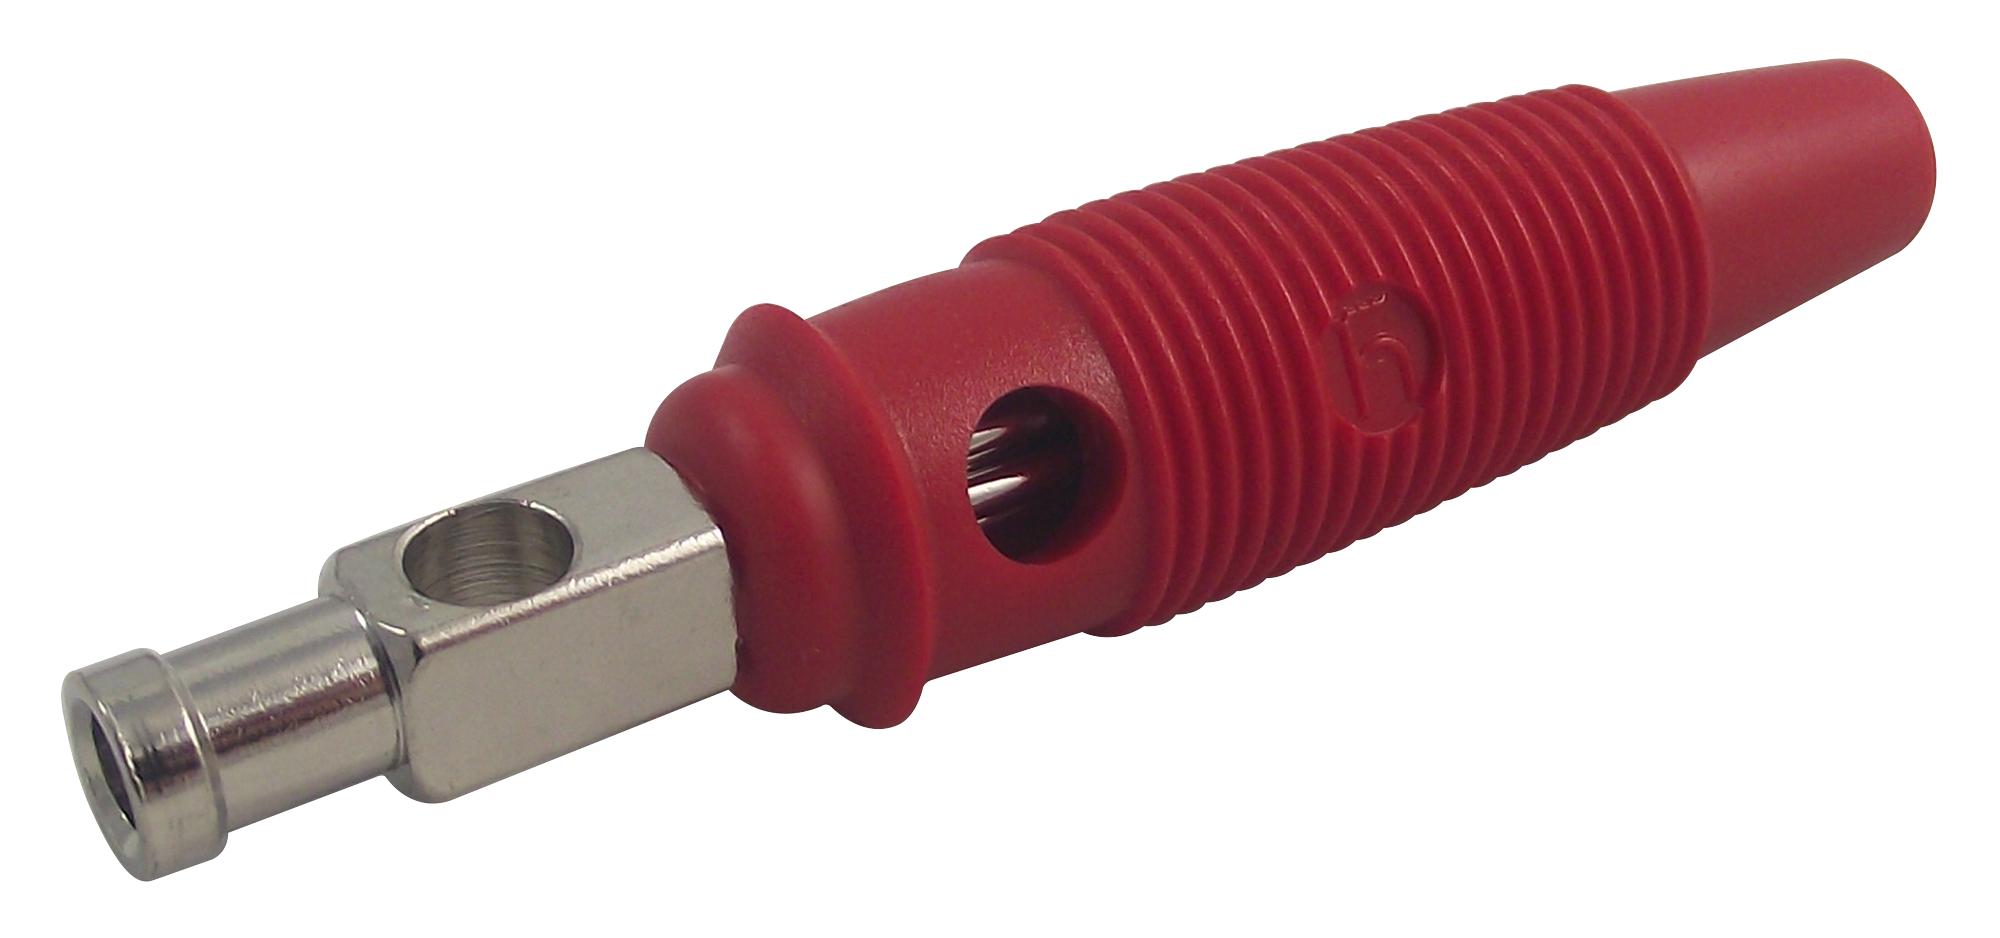 930727101 PLUG, 4MM, BUNCH PIN, RED, PK5, BSB HIRSCHMANN TEST AND MEASUREMENT